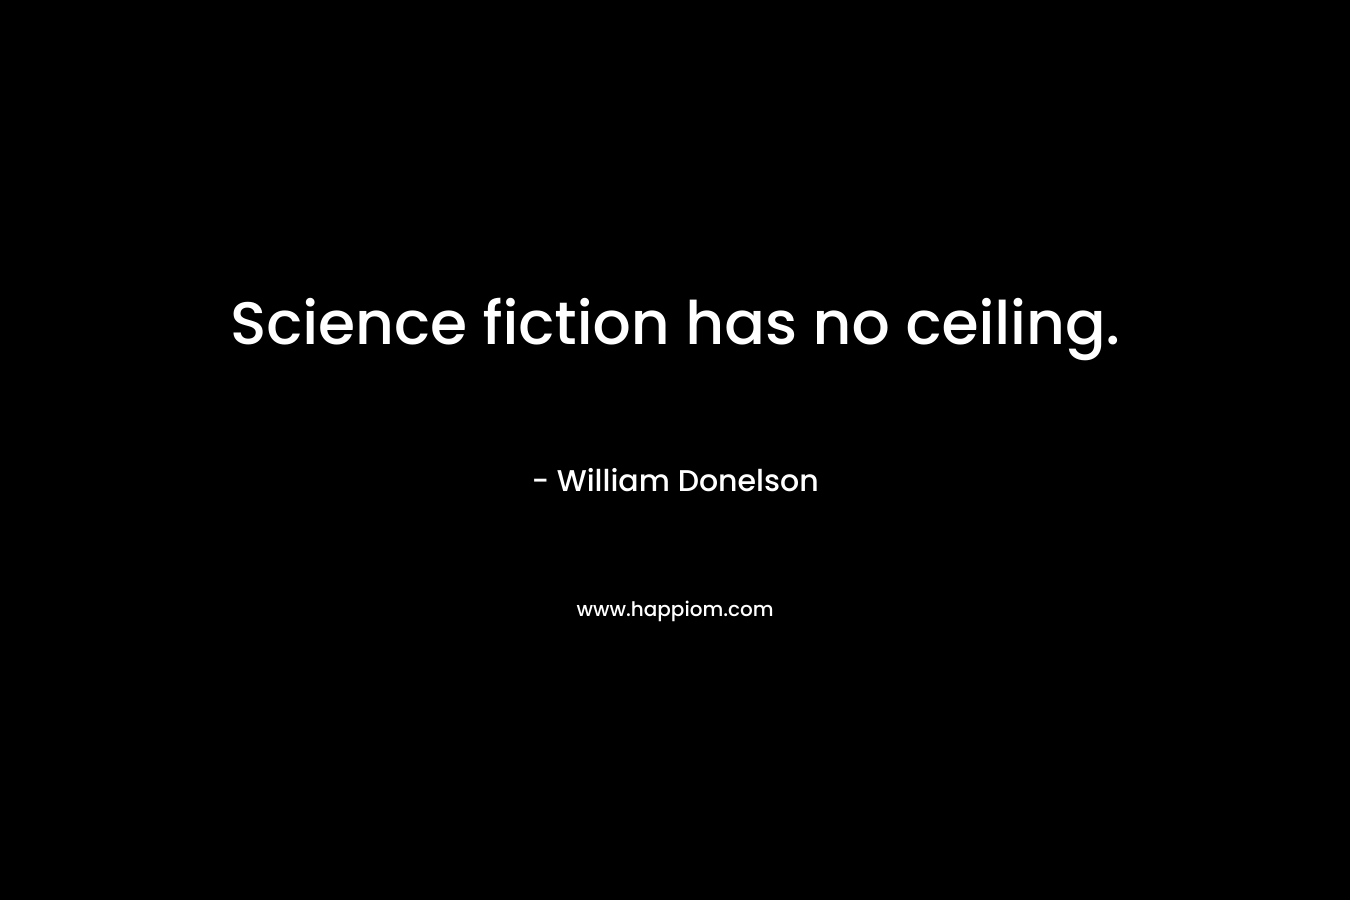 Science fiction has no ceiling. – William Donelson